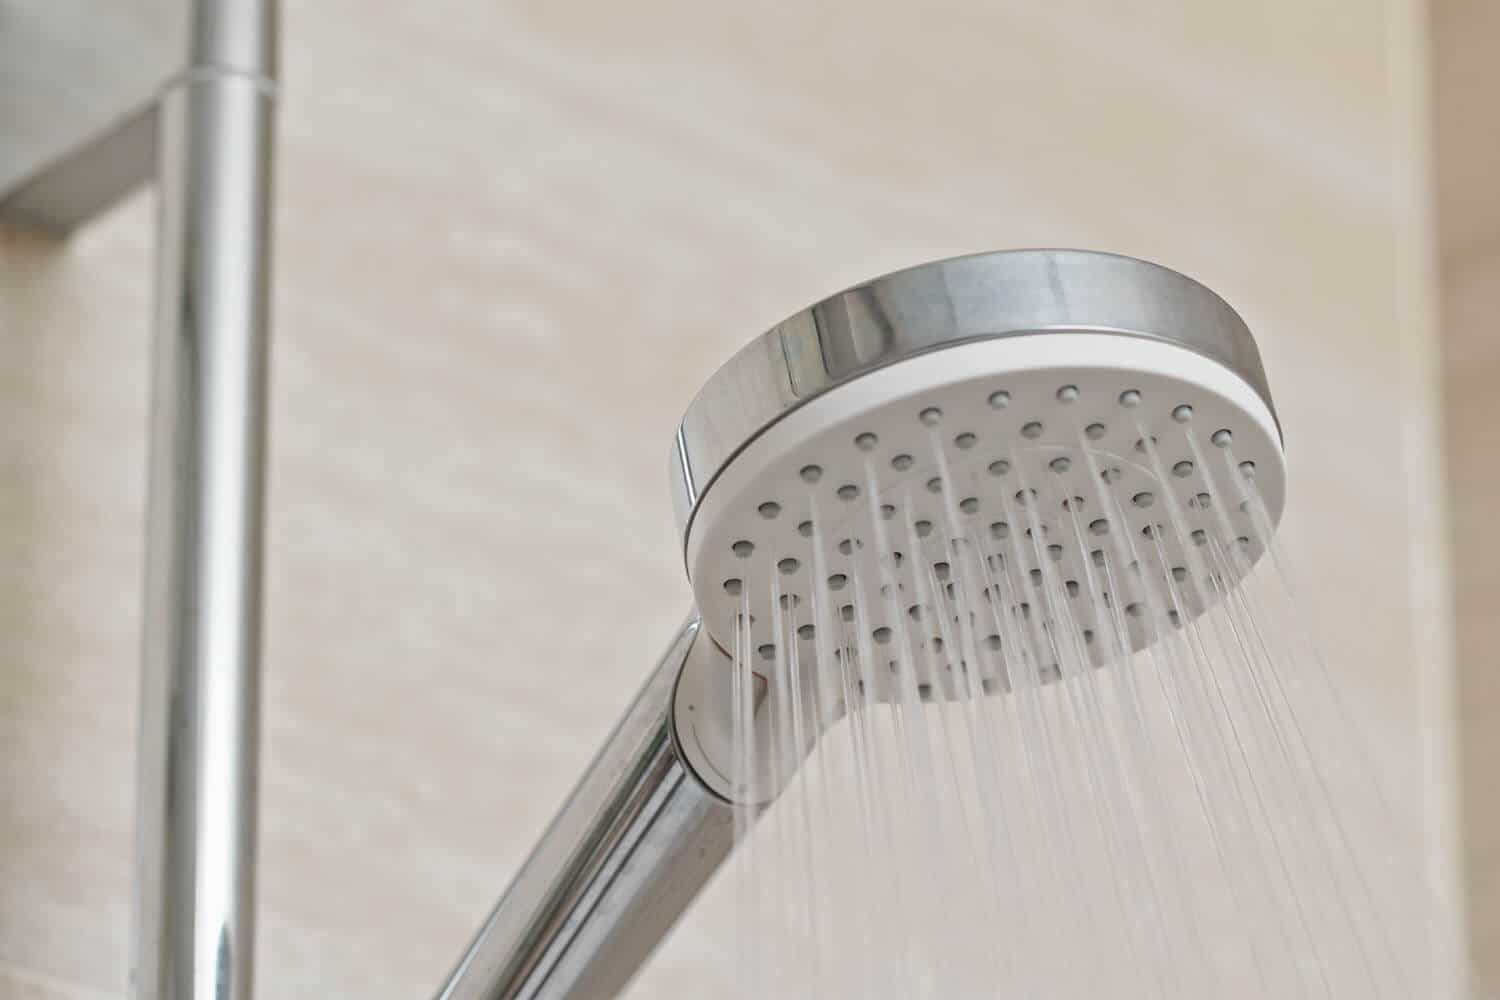 A shower head with hot water coming out smell like rotten eggs